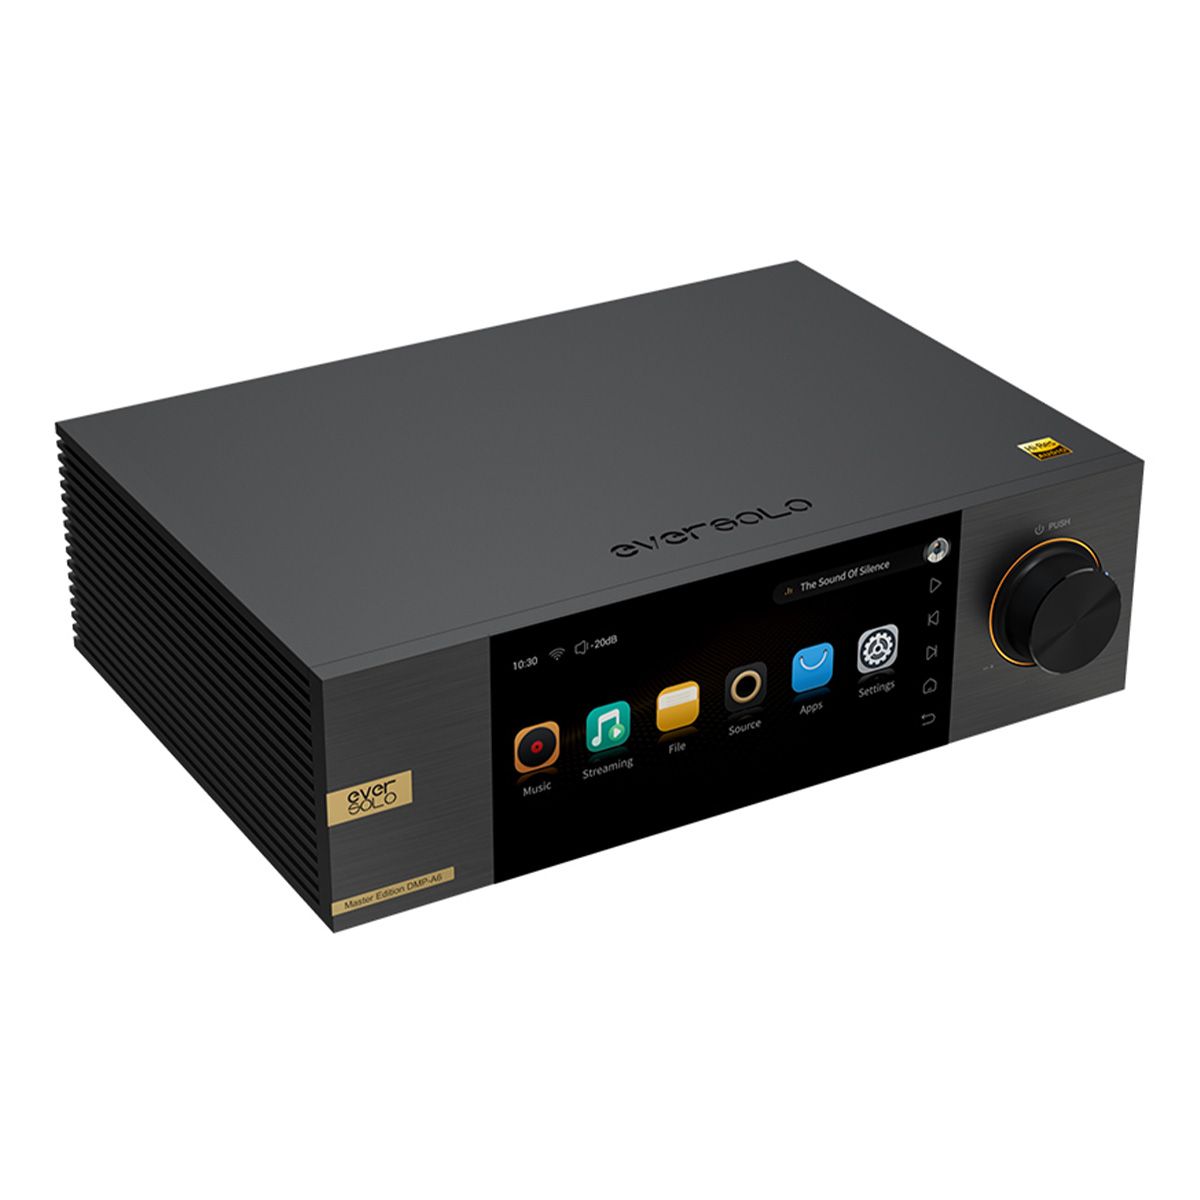 EverSolo DMP-A6 MASTER EDITION Network Streamer & DAC angled front left view